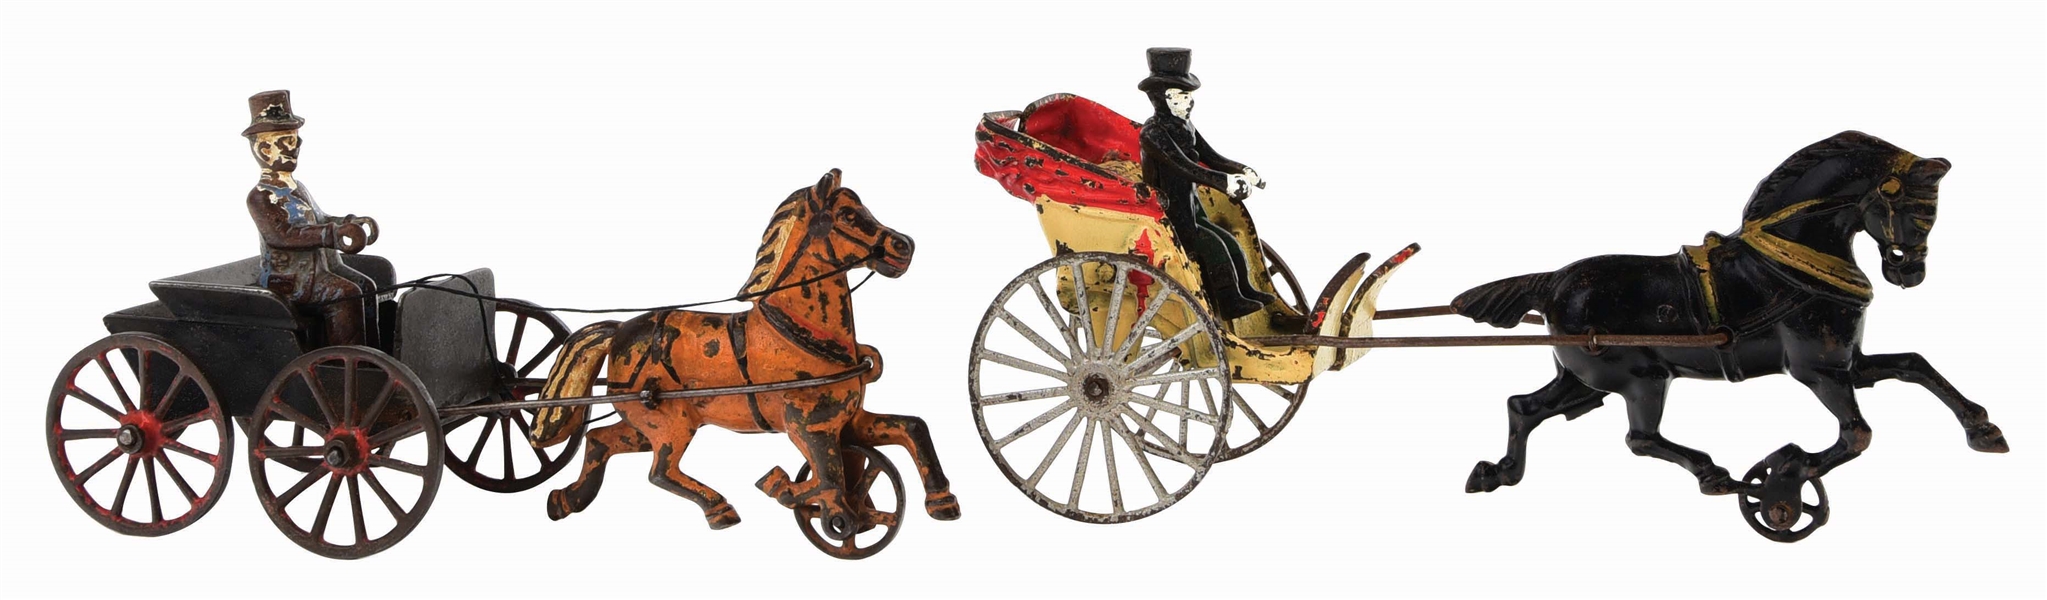 LOT OF 2: AMERICAN MADE CAST-IRON HORSE-DRAWN CART TOYS.